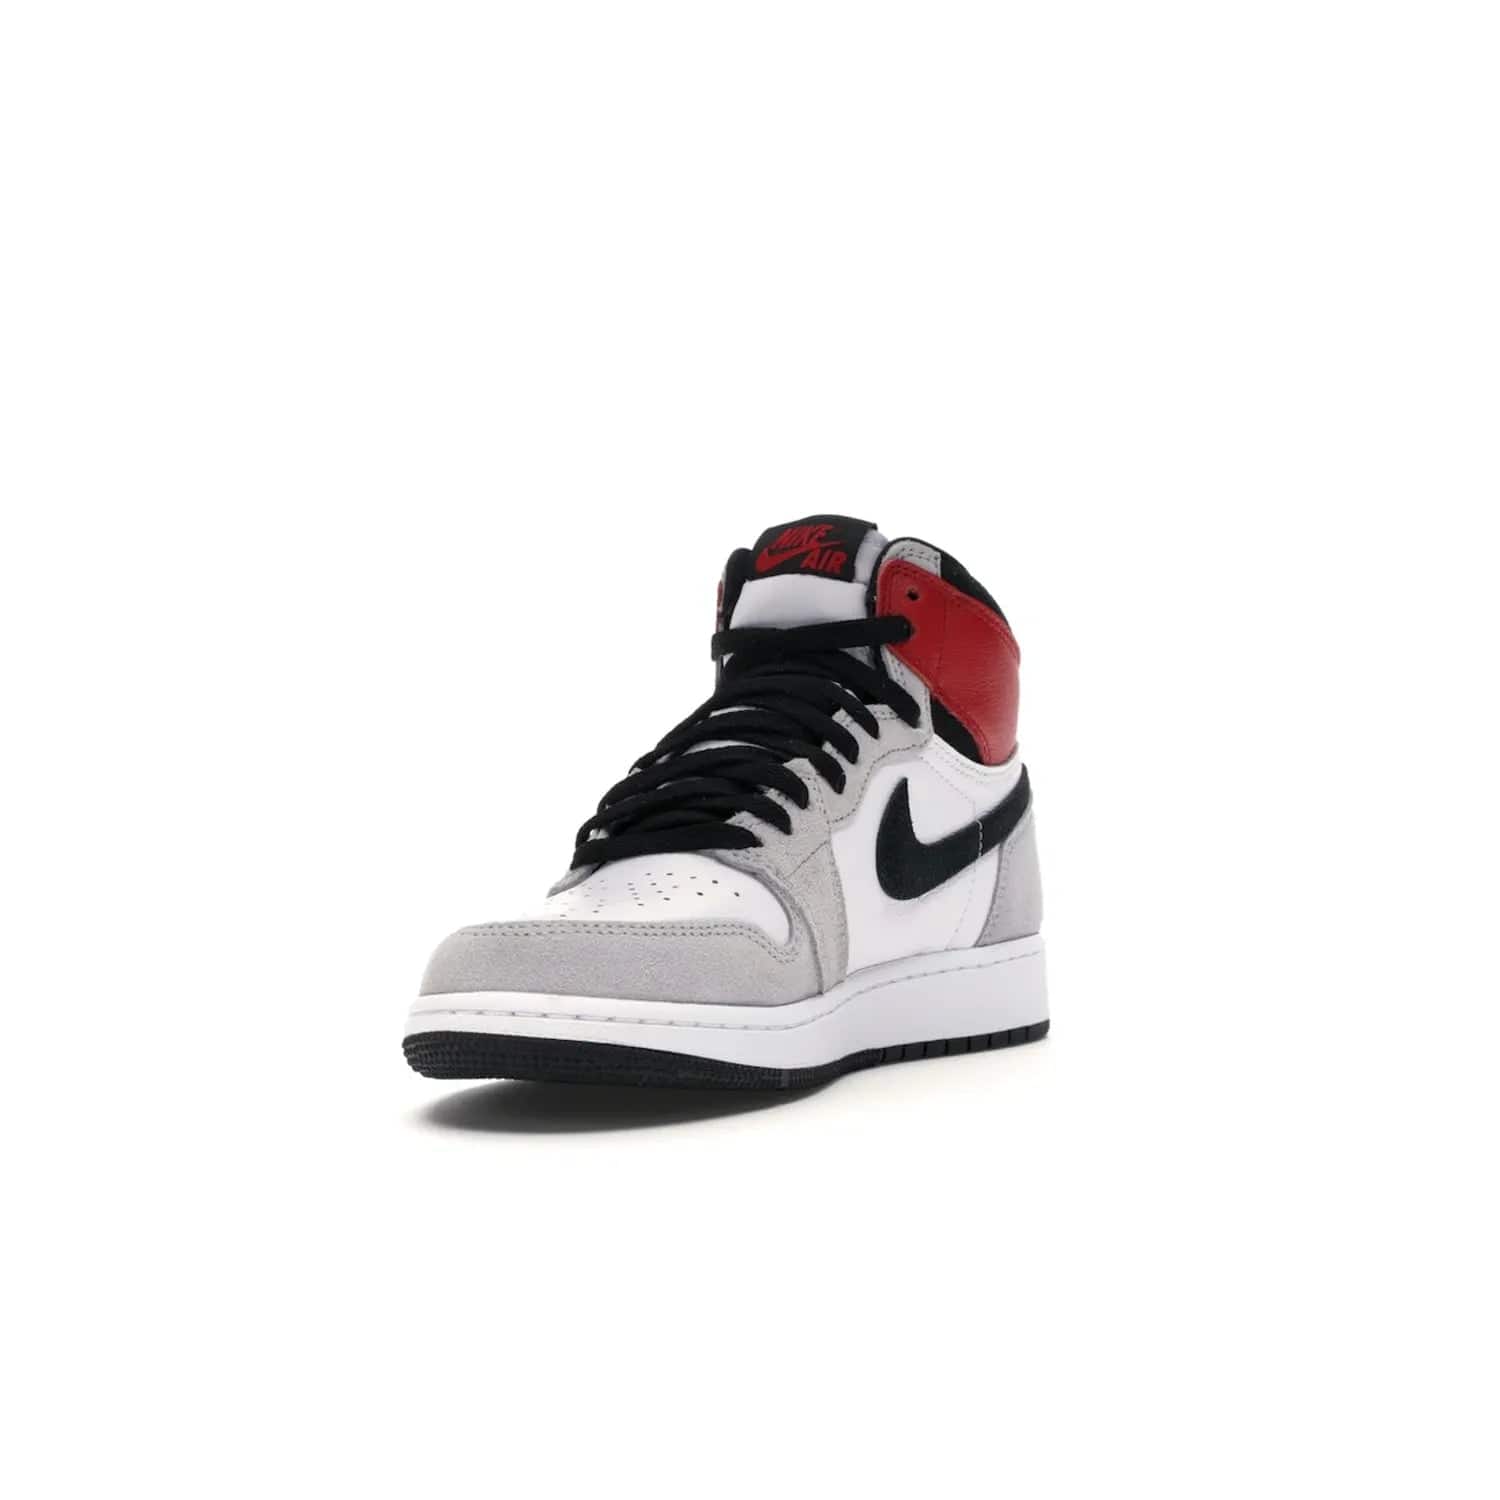 Jordan 1 Retro High Light Smoke Grey (GS) - Image 13 - Only at www.BallersClubKickz.com - Jordan 1 Retro High Light Smoke Grey (GS) features shades of grey, black, and Varsity Red with a bold silhouette. Premium white leather and suede overlays create a unique look. Released July 2020, offering style and performance. Perfect sneaker for any collector or fan.